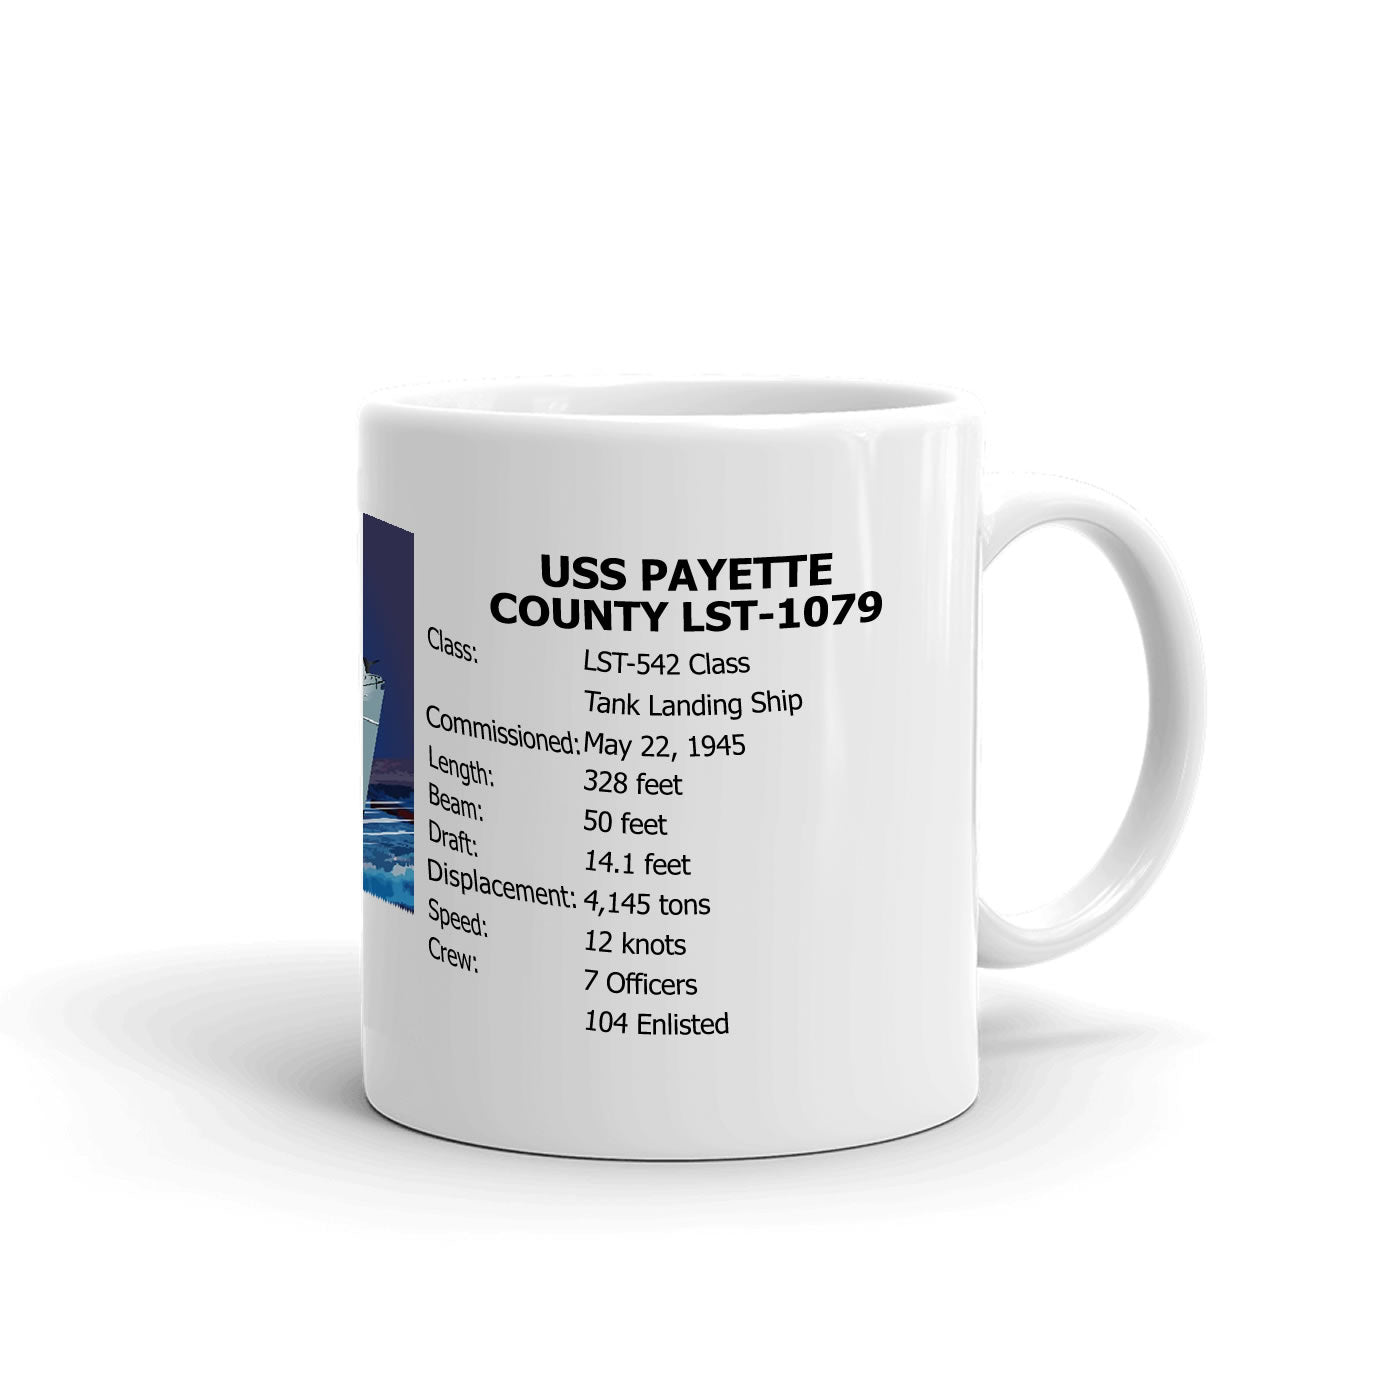 USS Payette County LST-1079 Coffee Cup Mug Right Handle